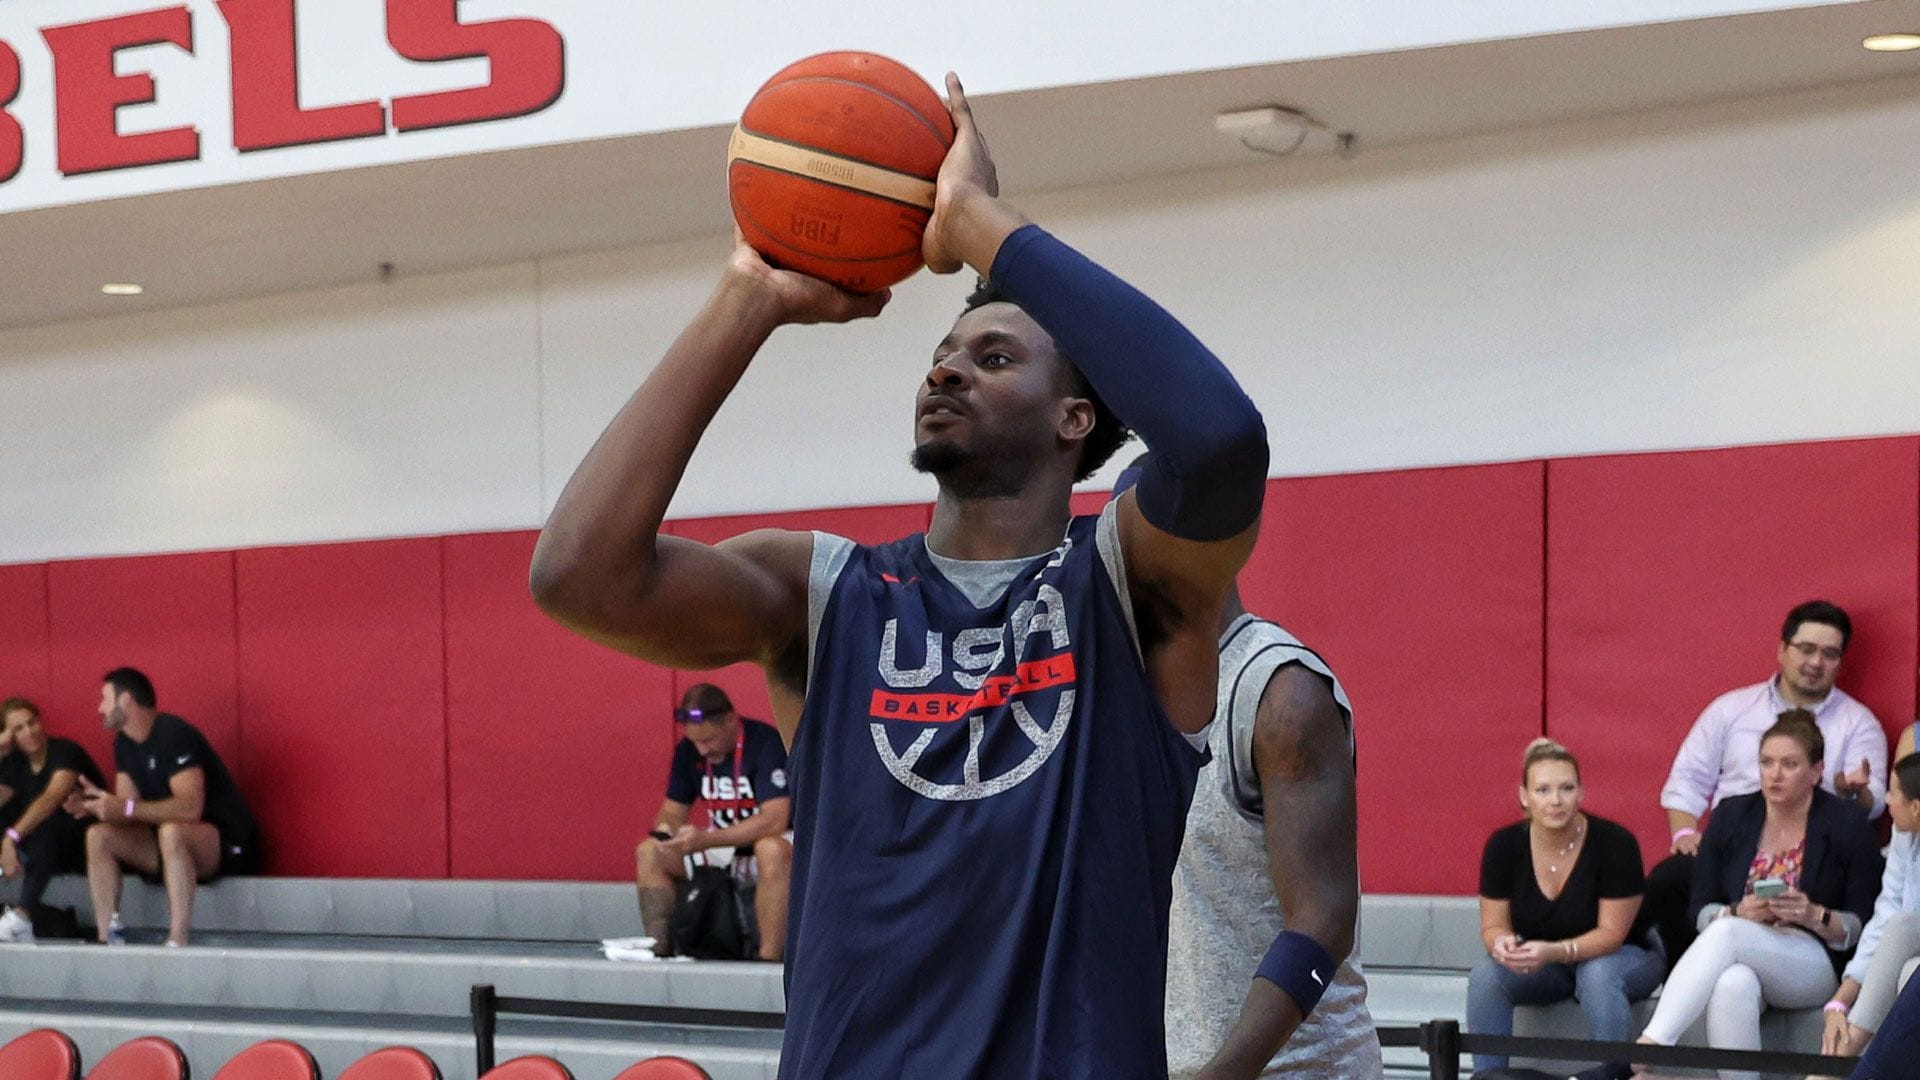 LAS VEGAS, NV - AUGUST 3: Jaren Jackson Jr. shoots the ball during the USA Men's National Team Practice as part of 2023 FIBA World Cup on August 3, 2023 at the Mendenhall Center in Las Vegas, Nevada.